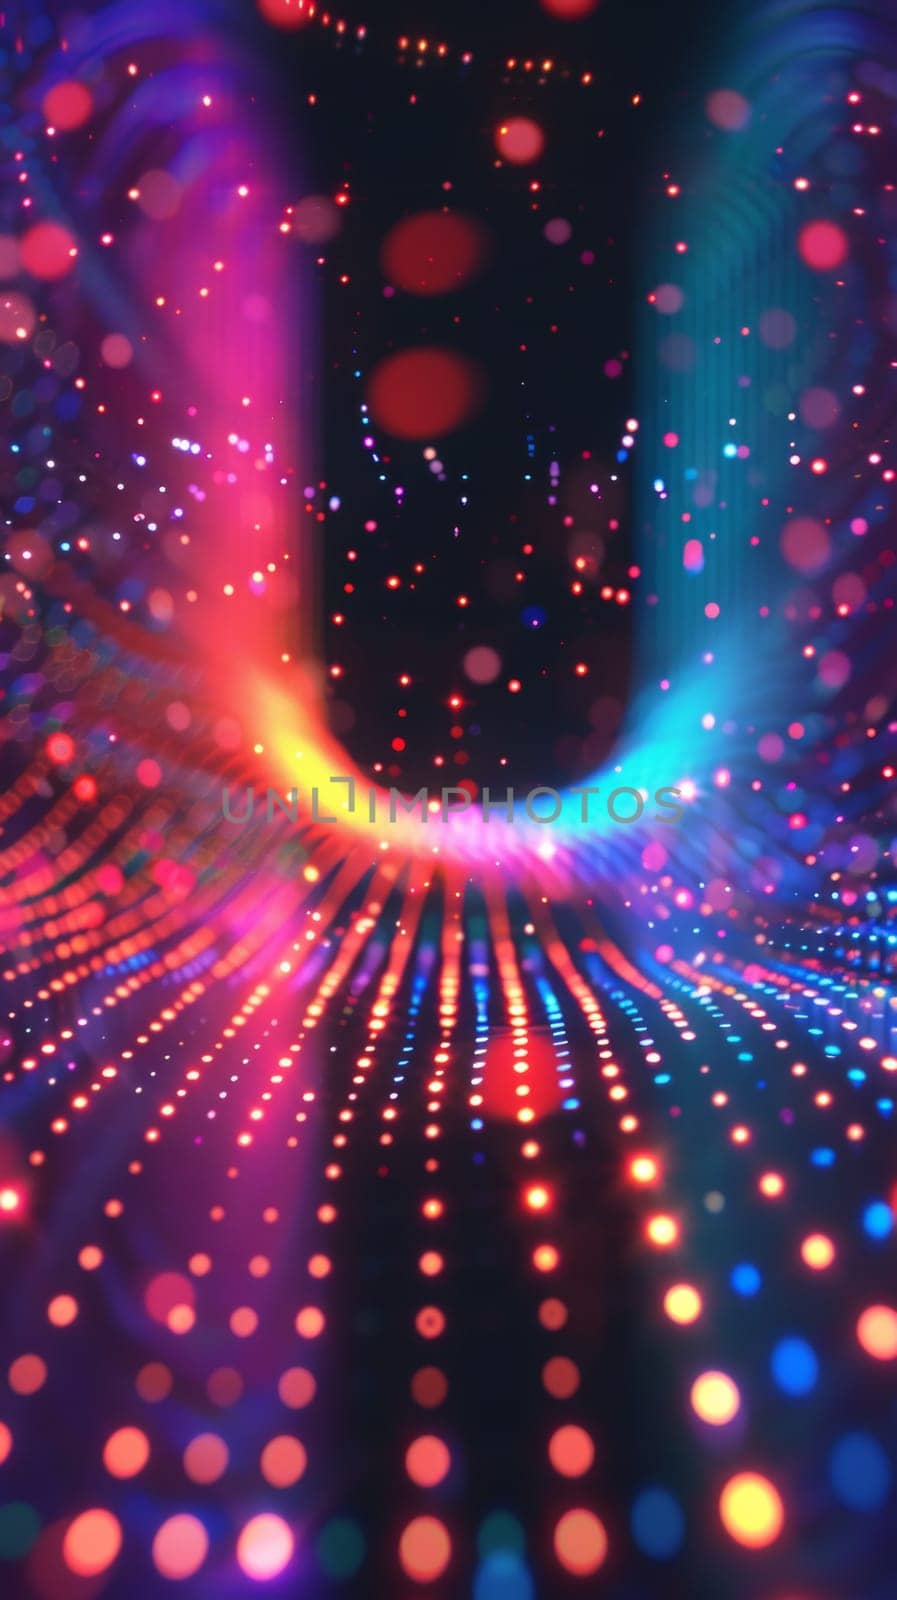 A colorful abstract image of a tunnel with lights and dots